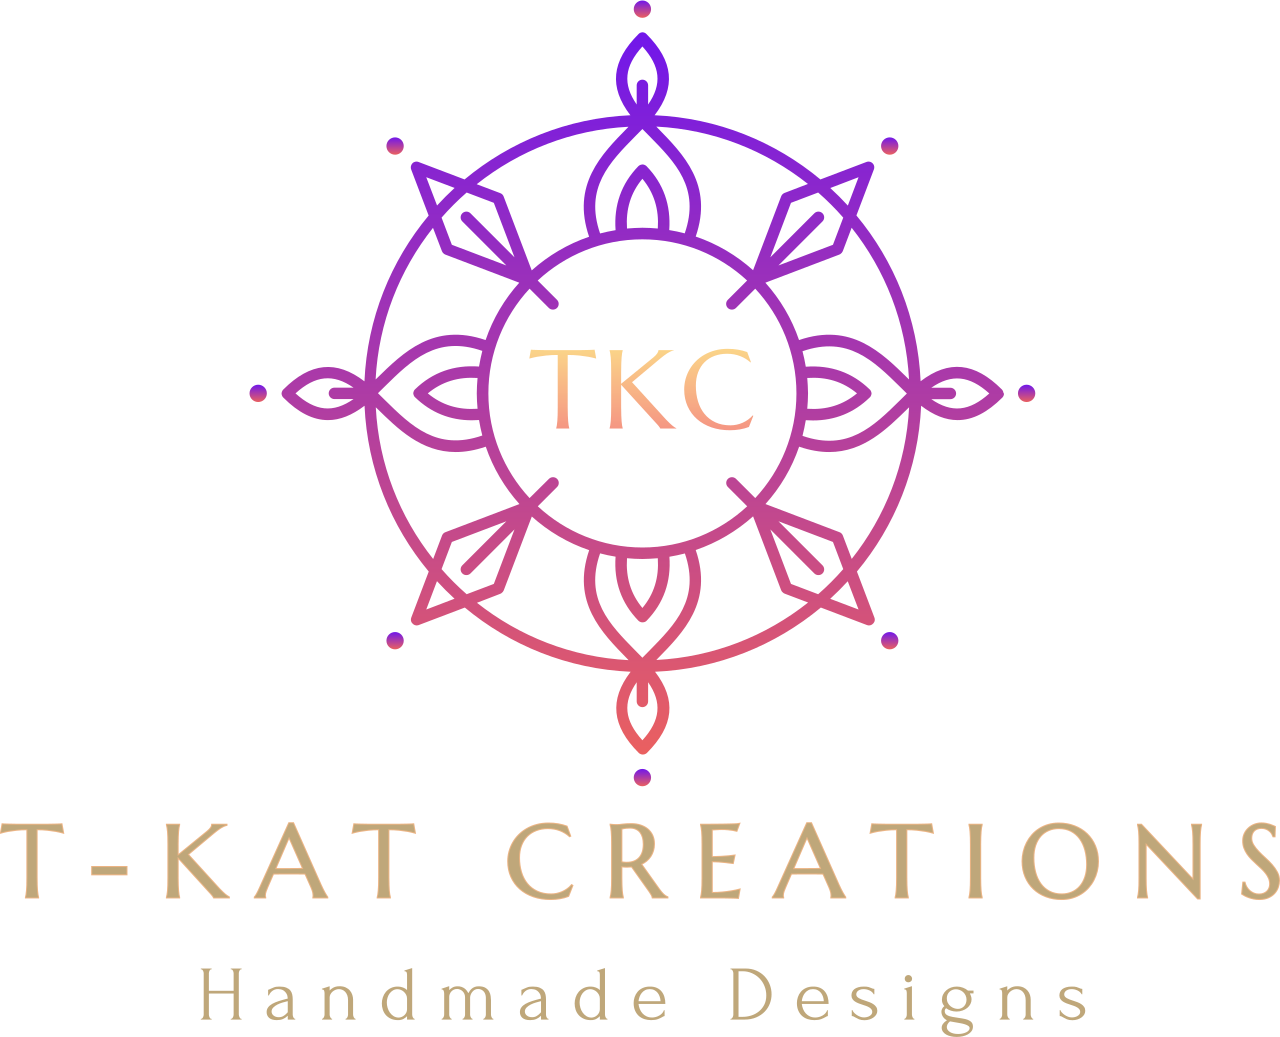 T-KAT CREATIONS's web page